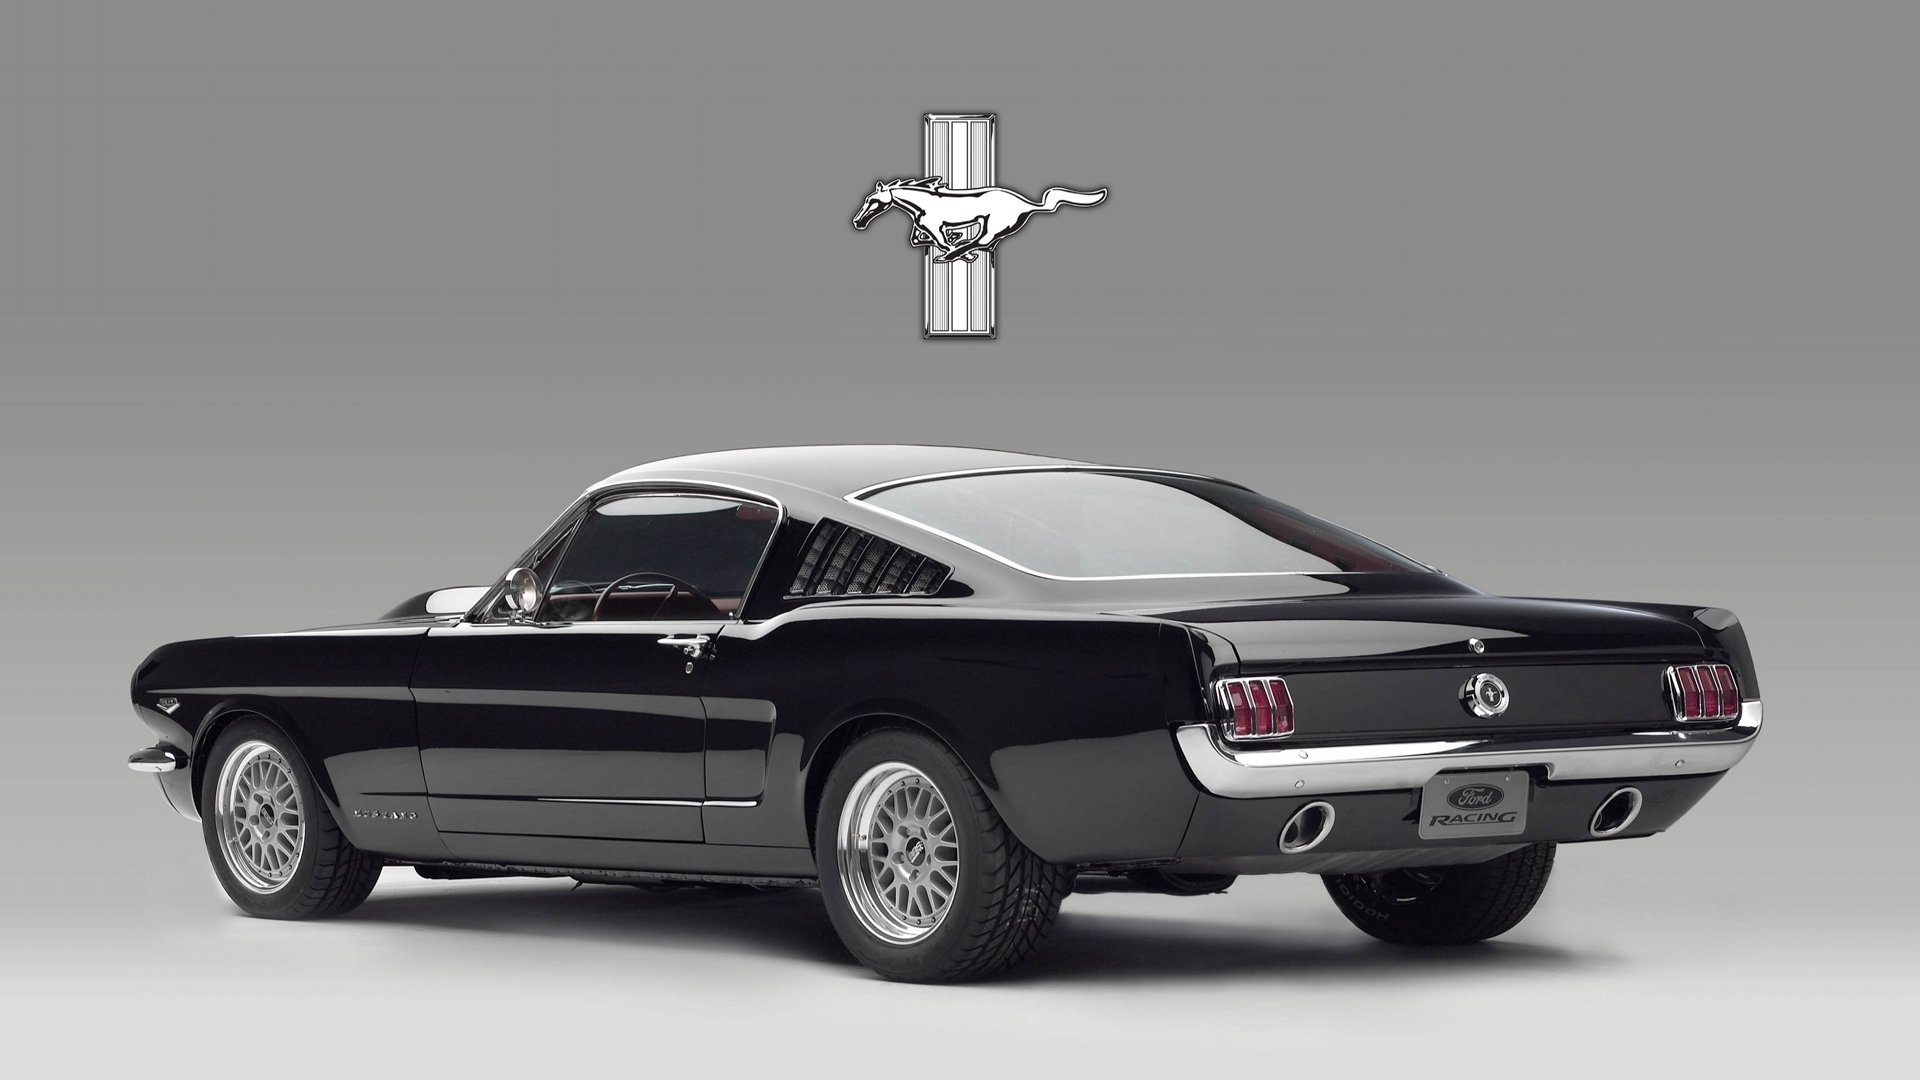 Mustang Fastback HD Wallpaper Background Image